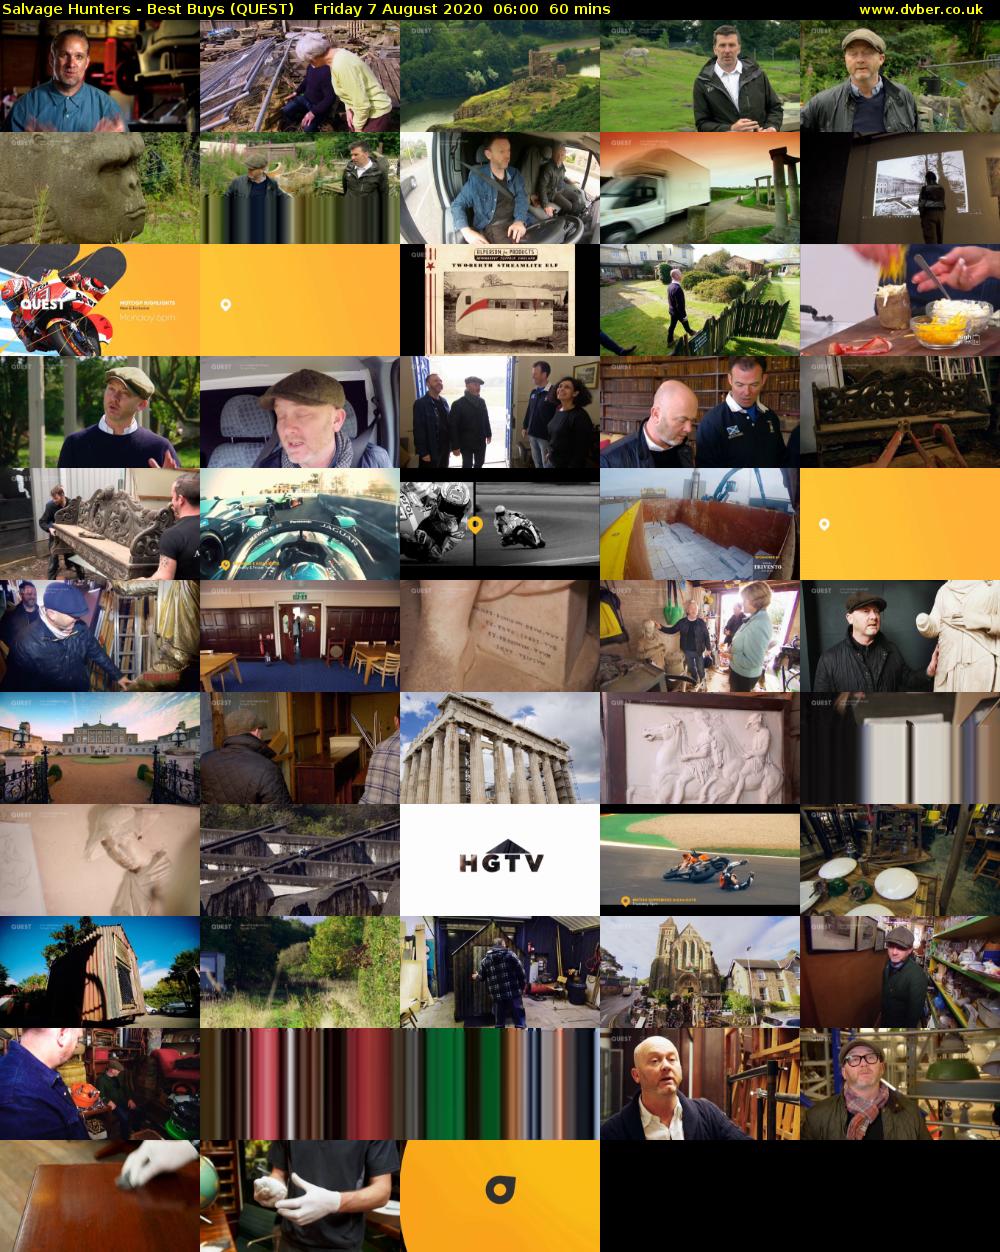 Salvage Hunters - Best Buys (QUEST) Friday 7 August 2020 06:00 - 07:00